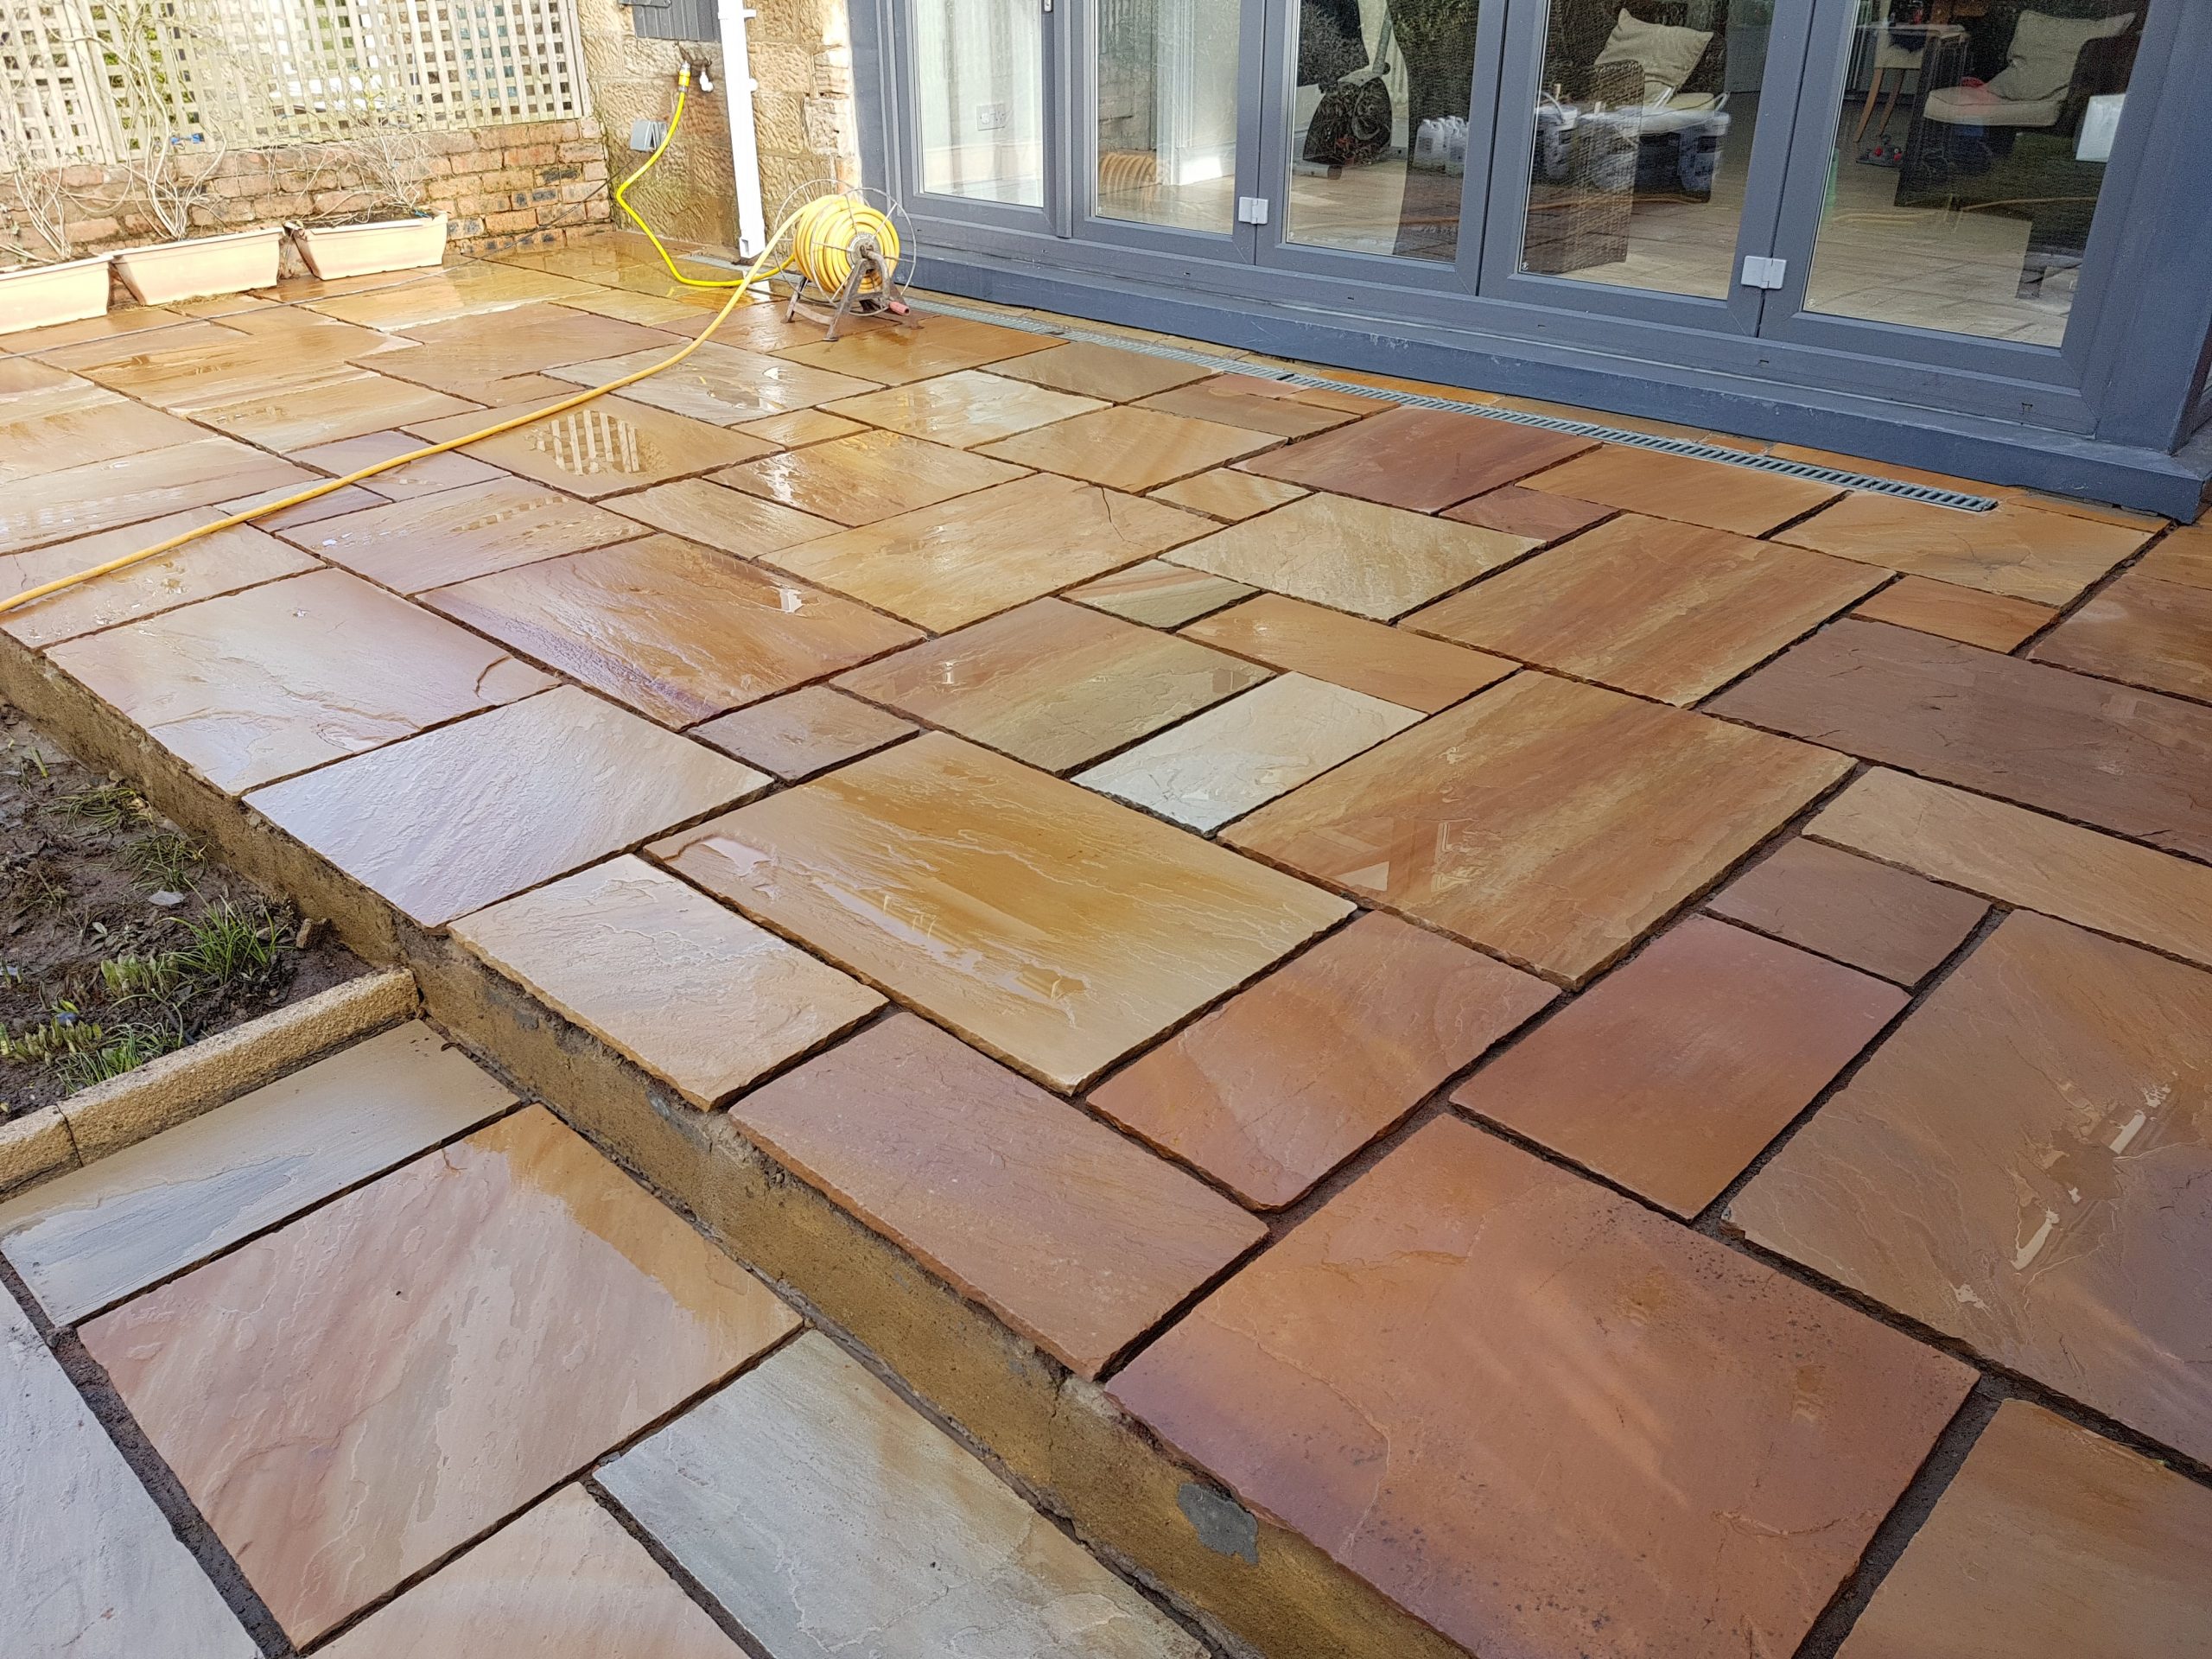 Patio Repointing Glasgow - Patio restoration and cleaning Glasgow